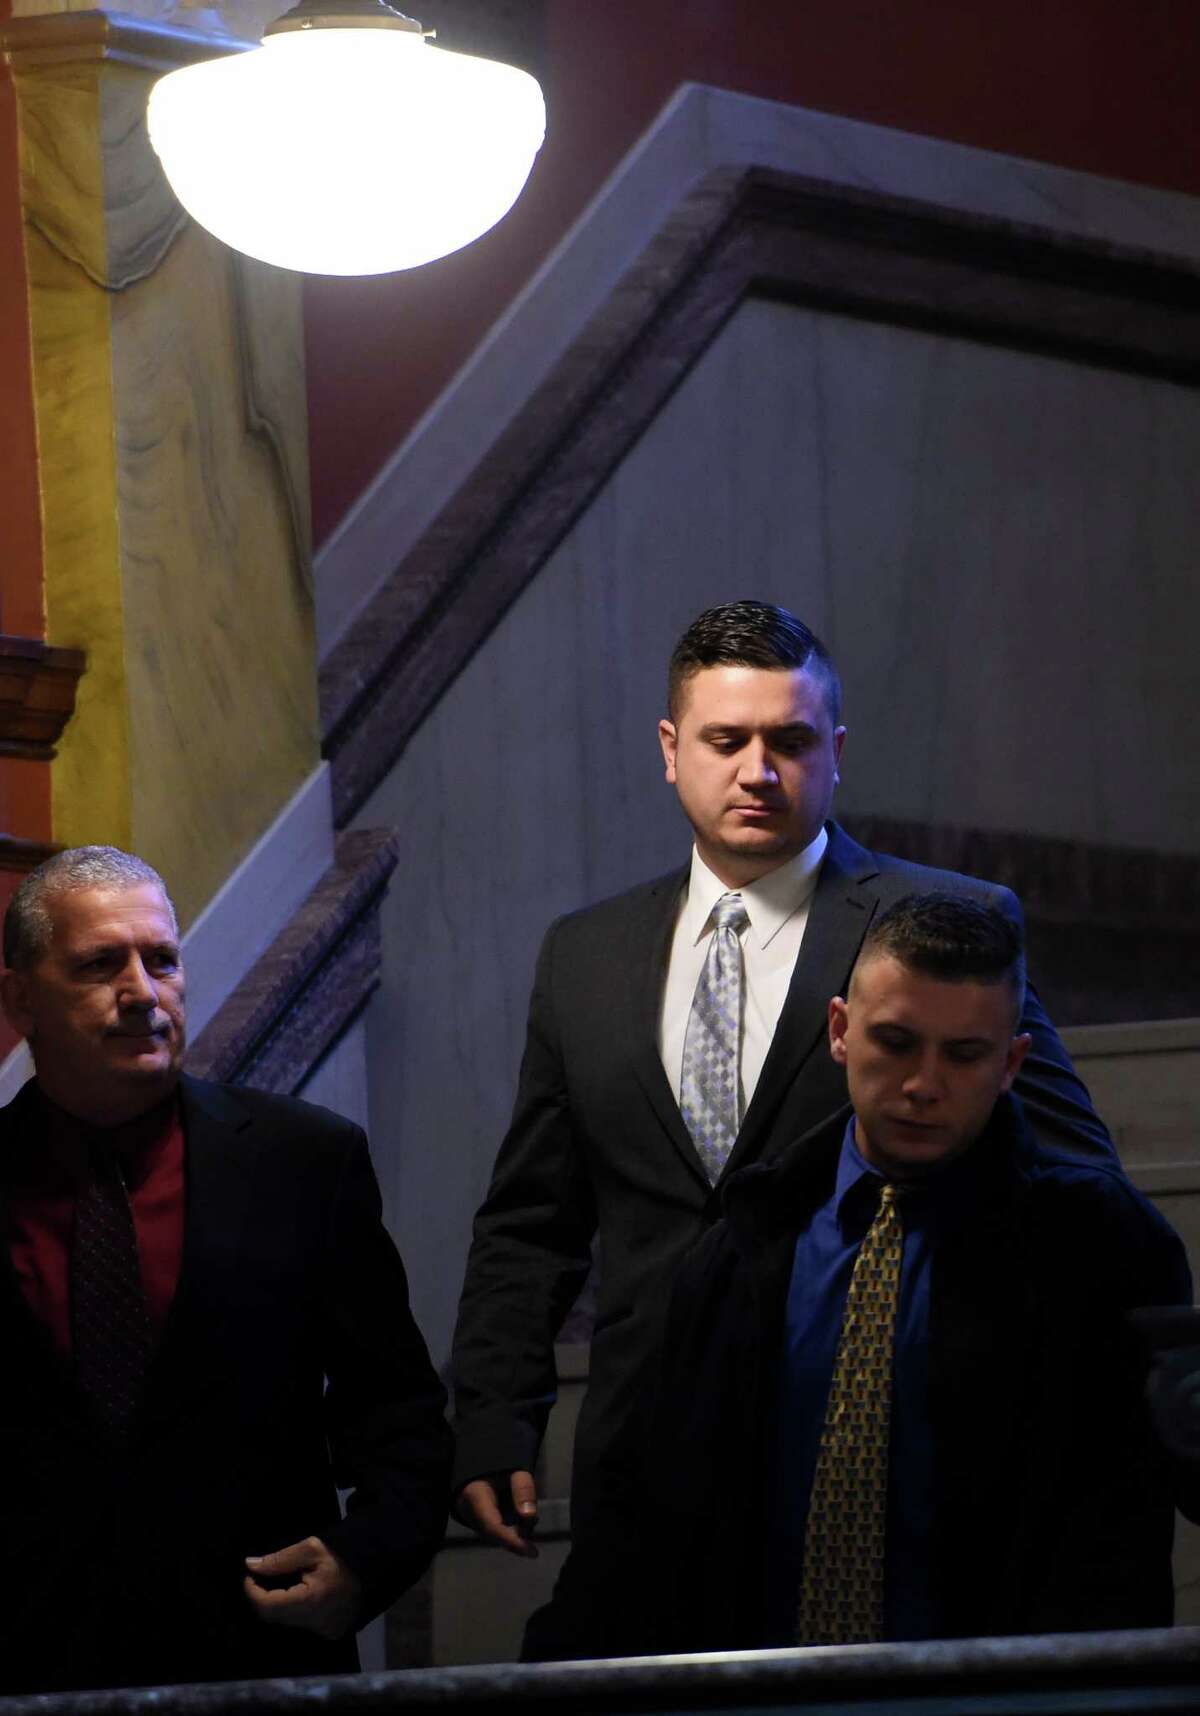 Nicholas Pontore, center, the 30-year-old former Watervliet cops accused of protecting a gang-related narcotics ring and buying cocaine while on the job, arrives at the Rensselaer County Courthouse Monday, Jan. 11, 2016, in Troy, N.Y. Pontore took a plea deal and was taken to jail after a conviction on 4th degree possession of a controlled substance. (Skip Dickstein/Times Union)